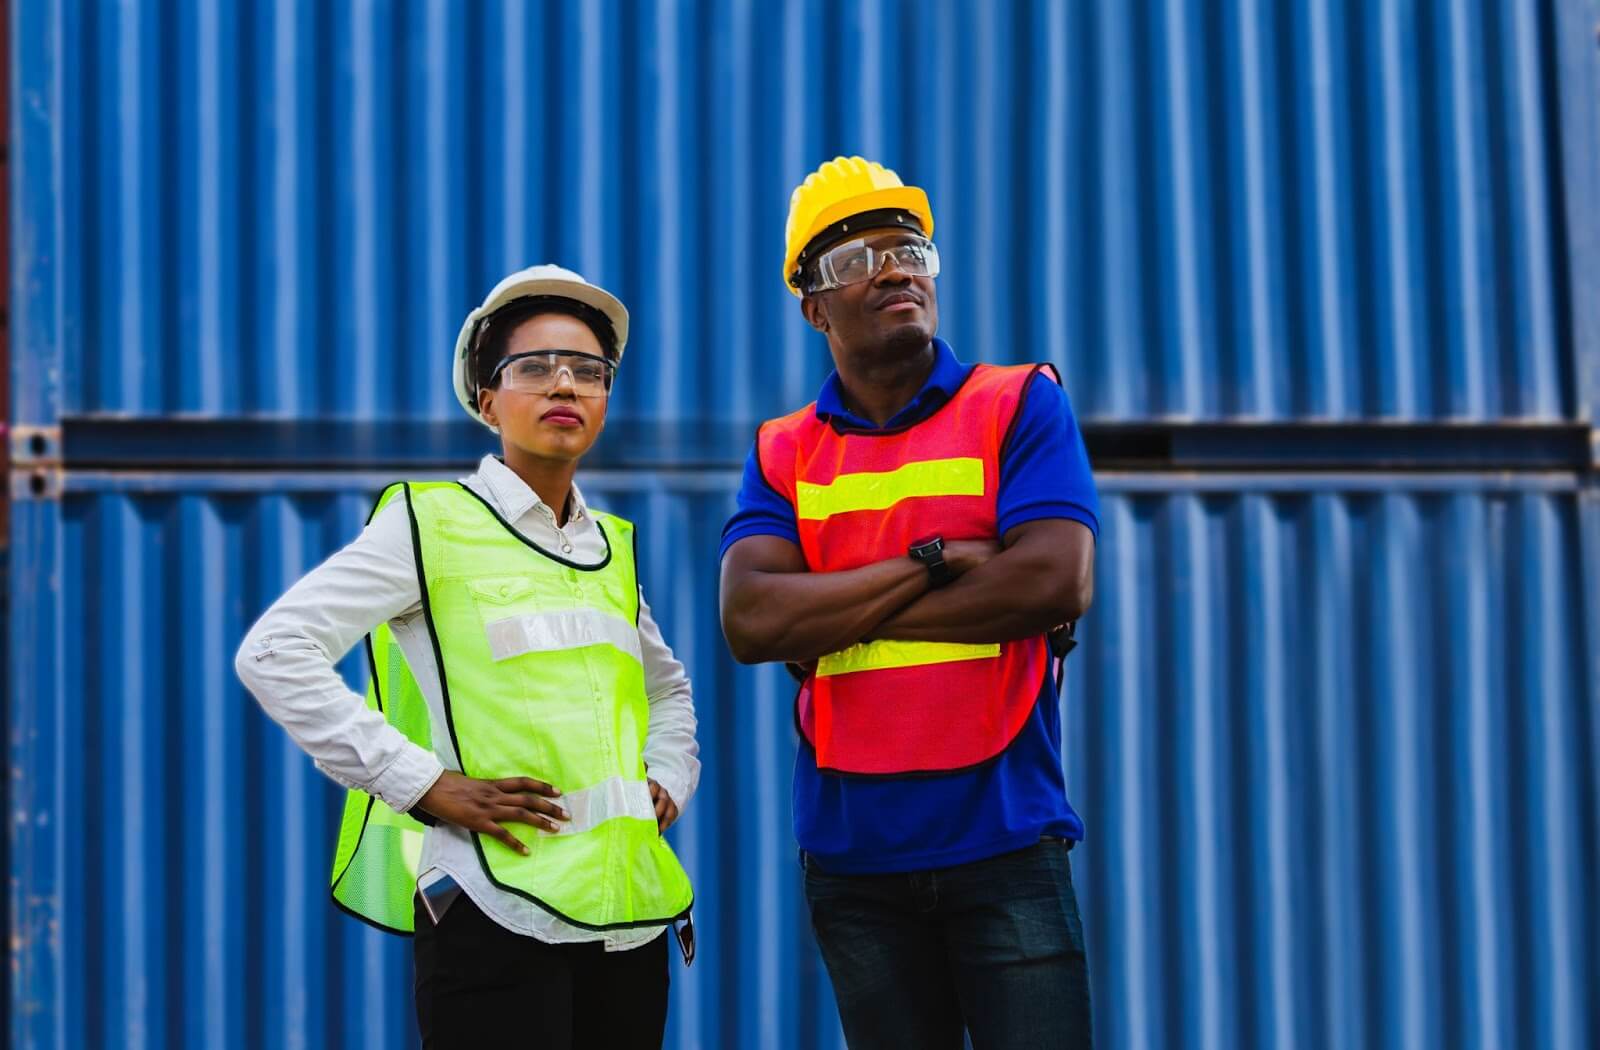 Man and woman wearing reflective vests and hard hats standing in front of a stack of shipping containers